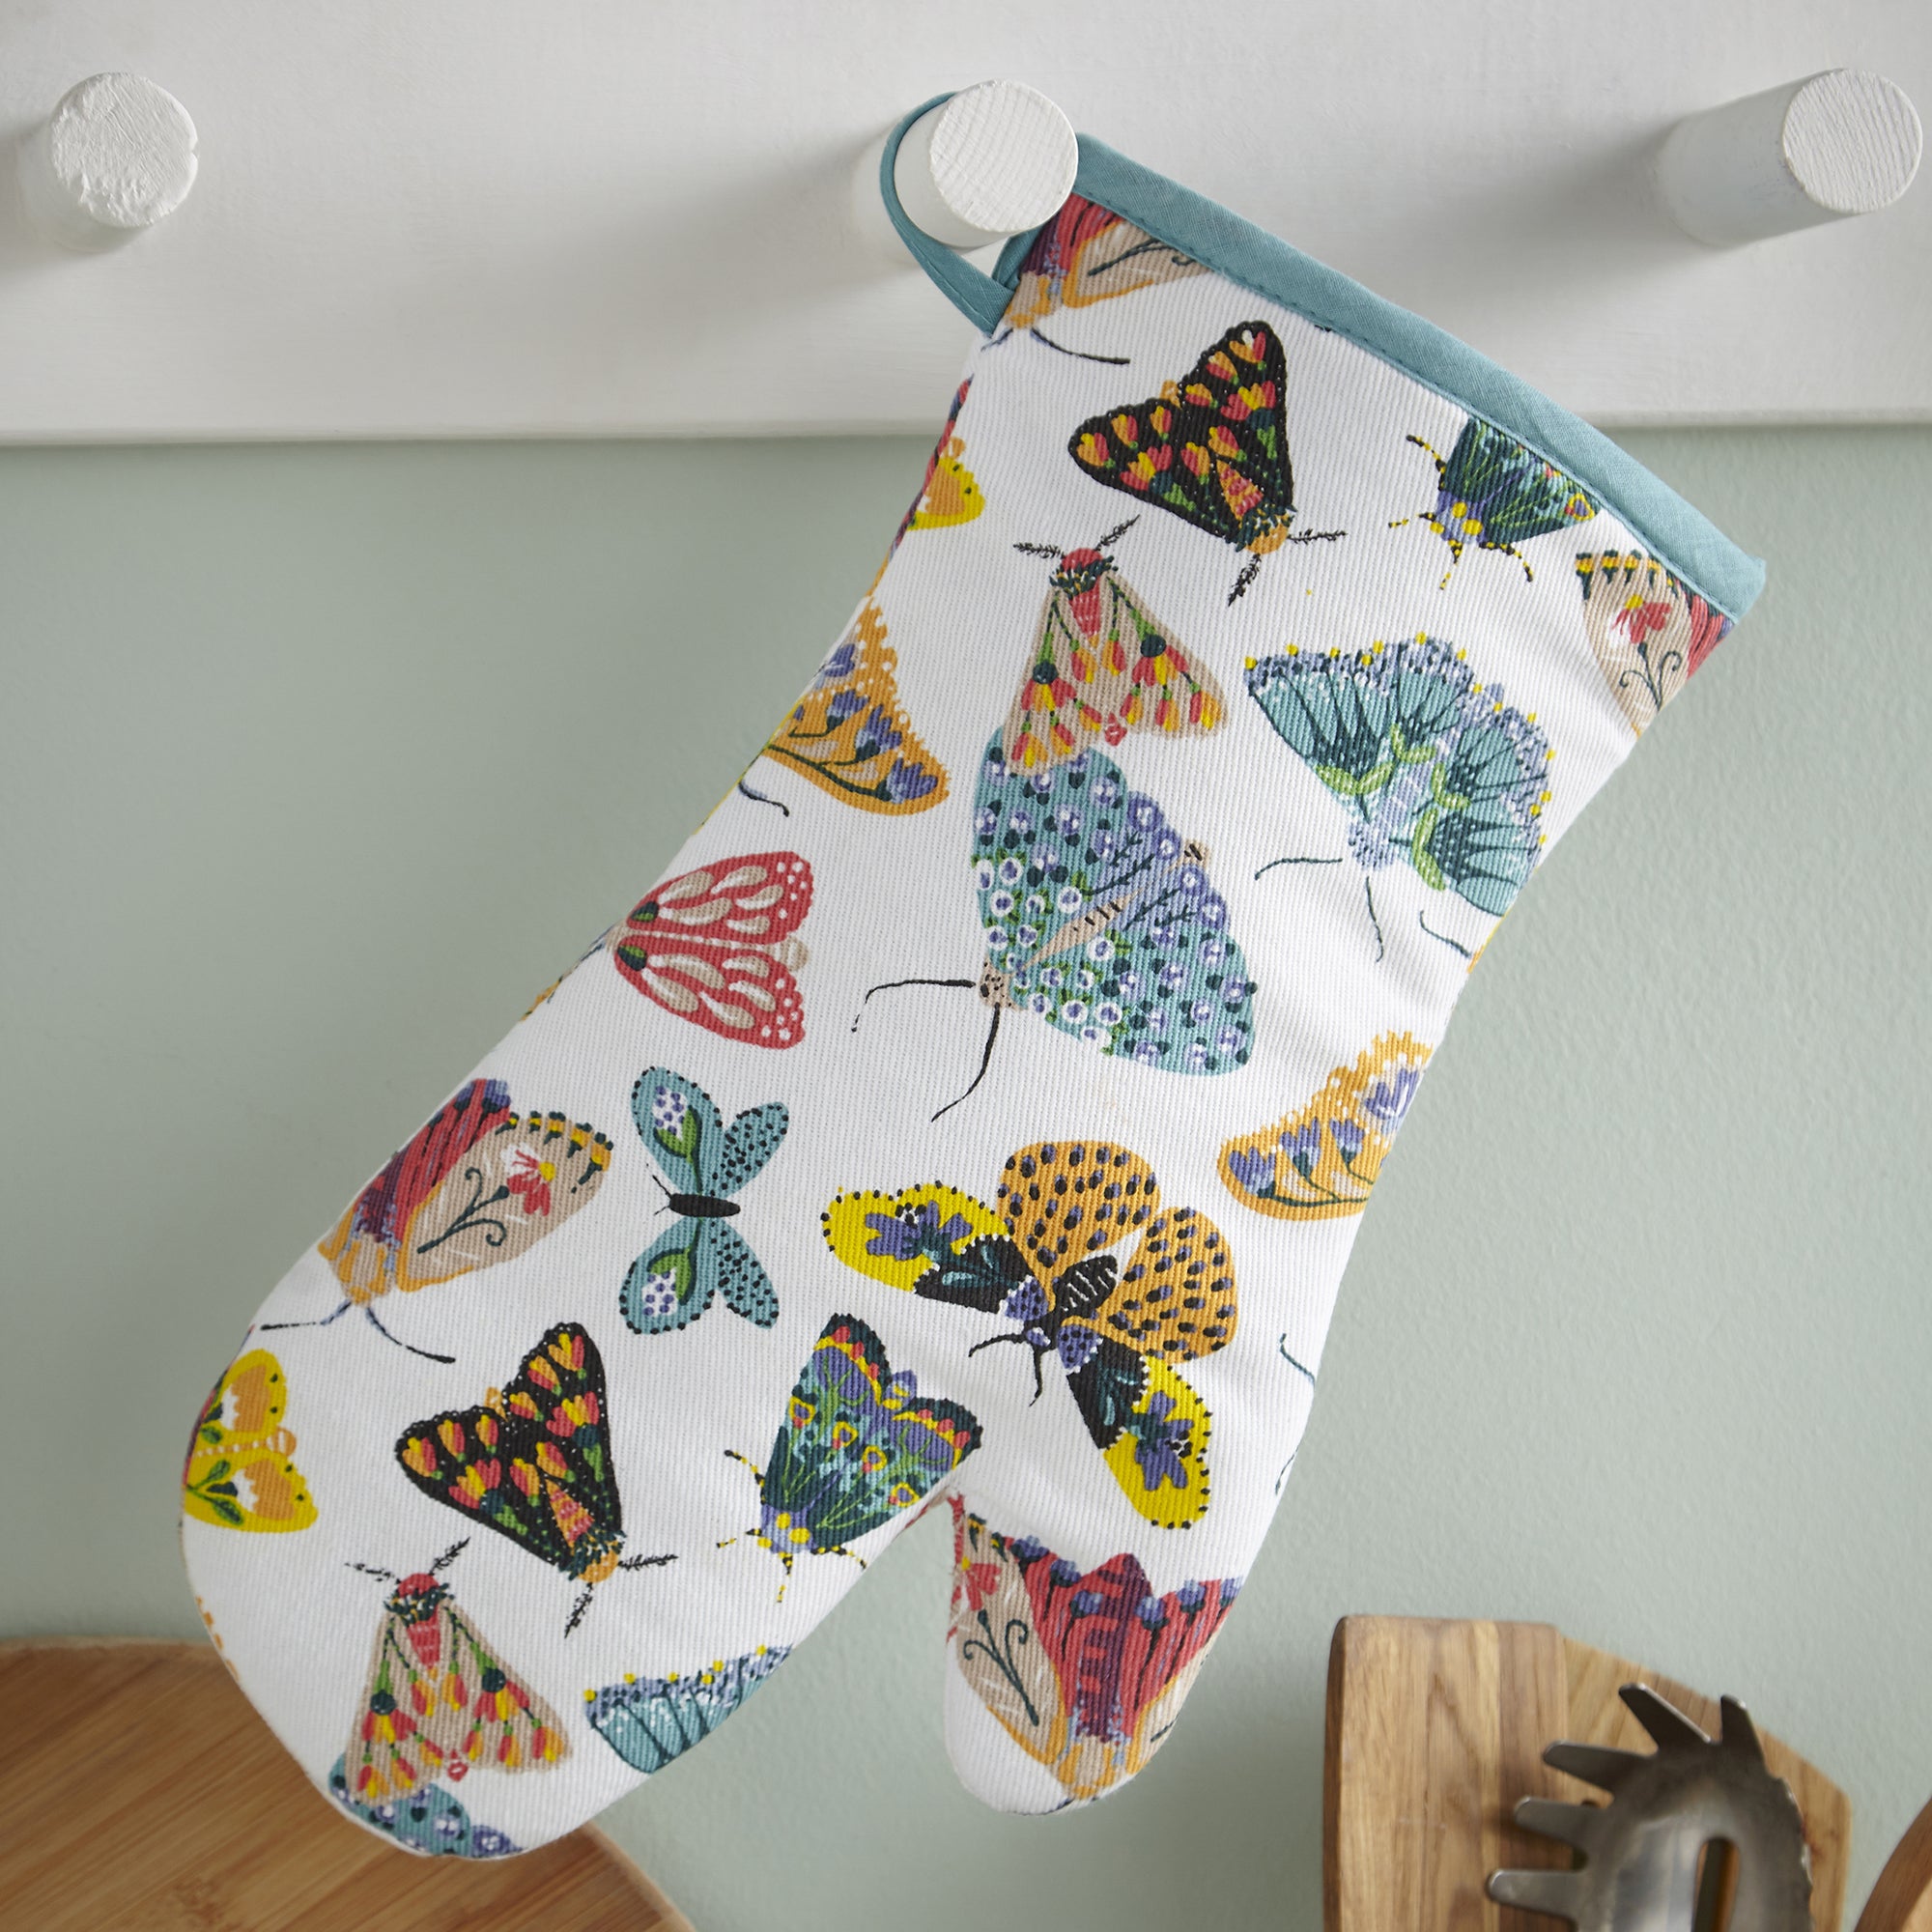 Ulster Weavers Gauntlet Single Oven Glove - Butterfly House (100% Cotton Outer; 100% Polyester wadding; CE marked, Multicolour) - Gauntlet Oven Glove - Ulster Weavers